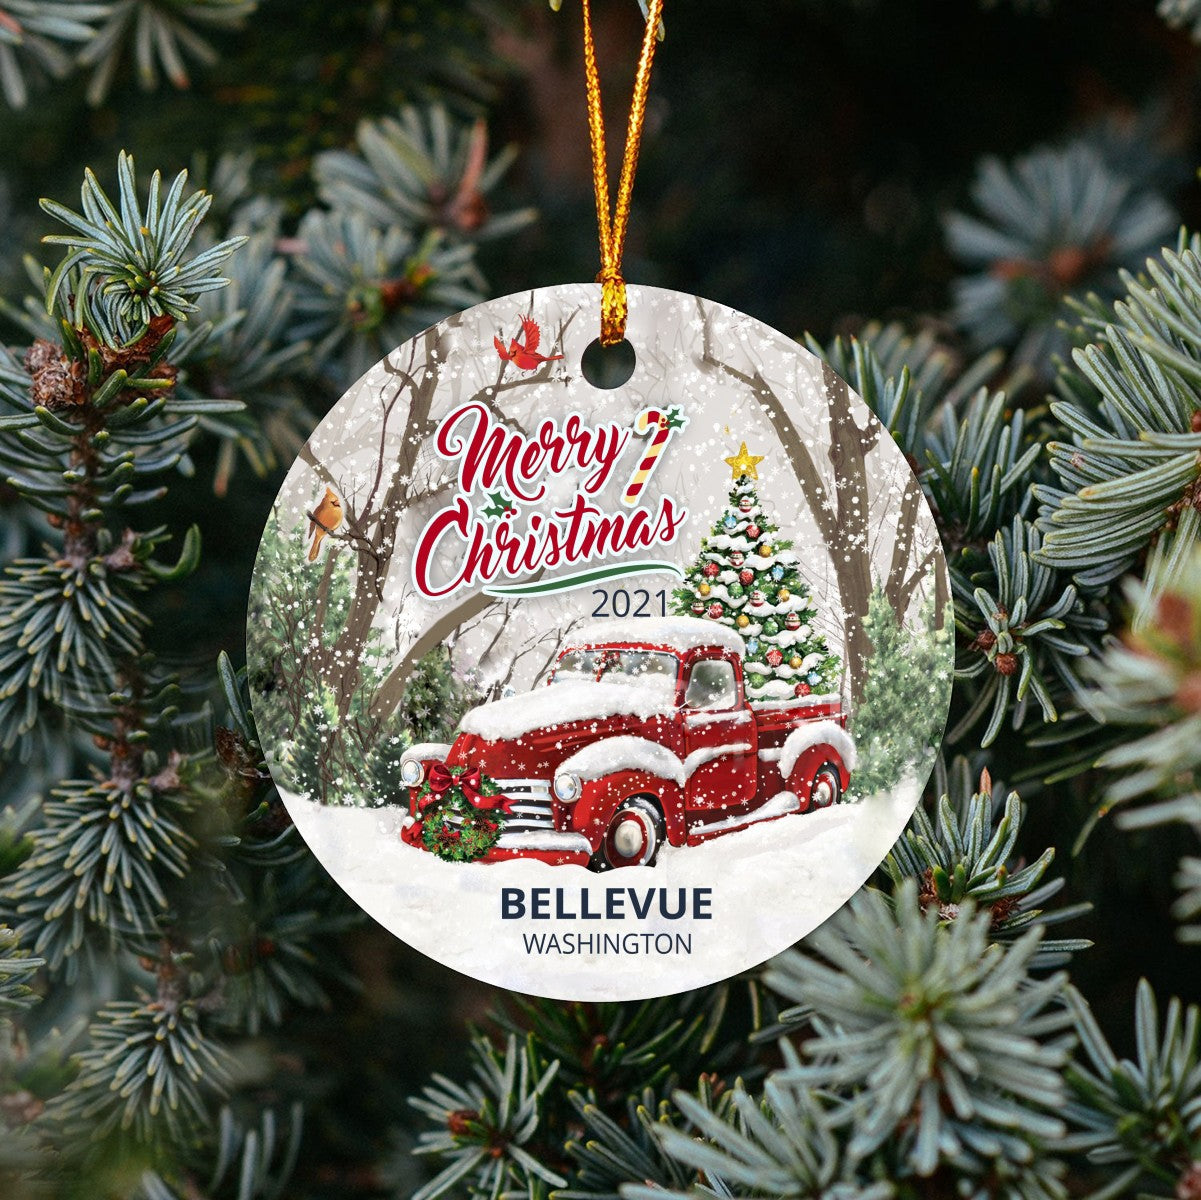 Christmas Tree Ornaments Bellevue - Ornament Customize With Name City And State Bellevue Washington WA - Red Truck Xmas Ornaments 3'' Plastic Gift For Family, Friend And Housewarming